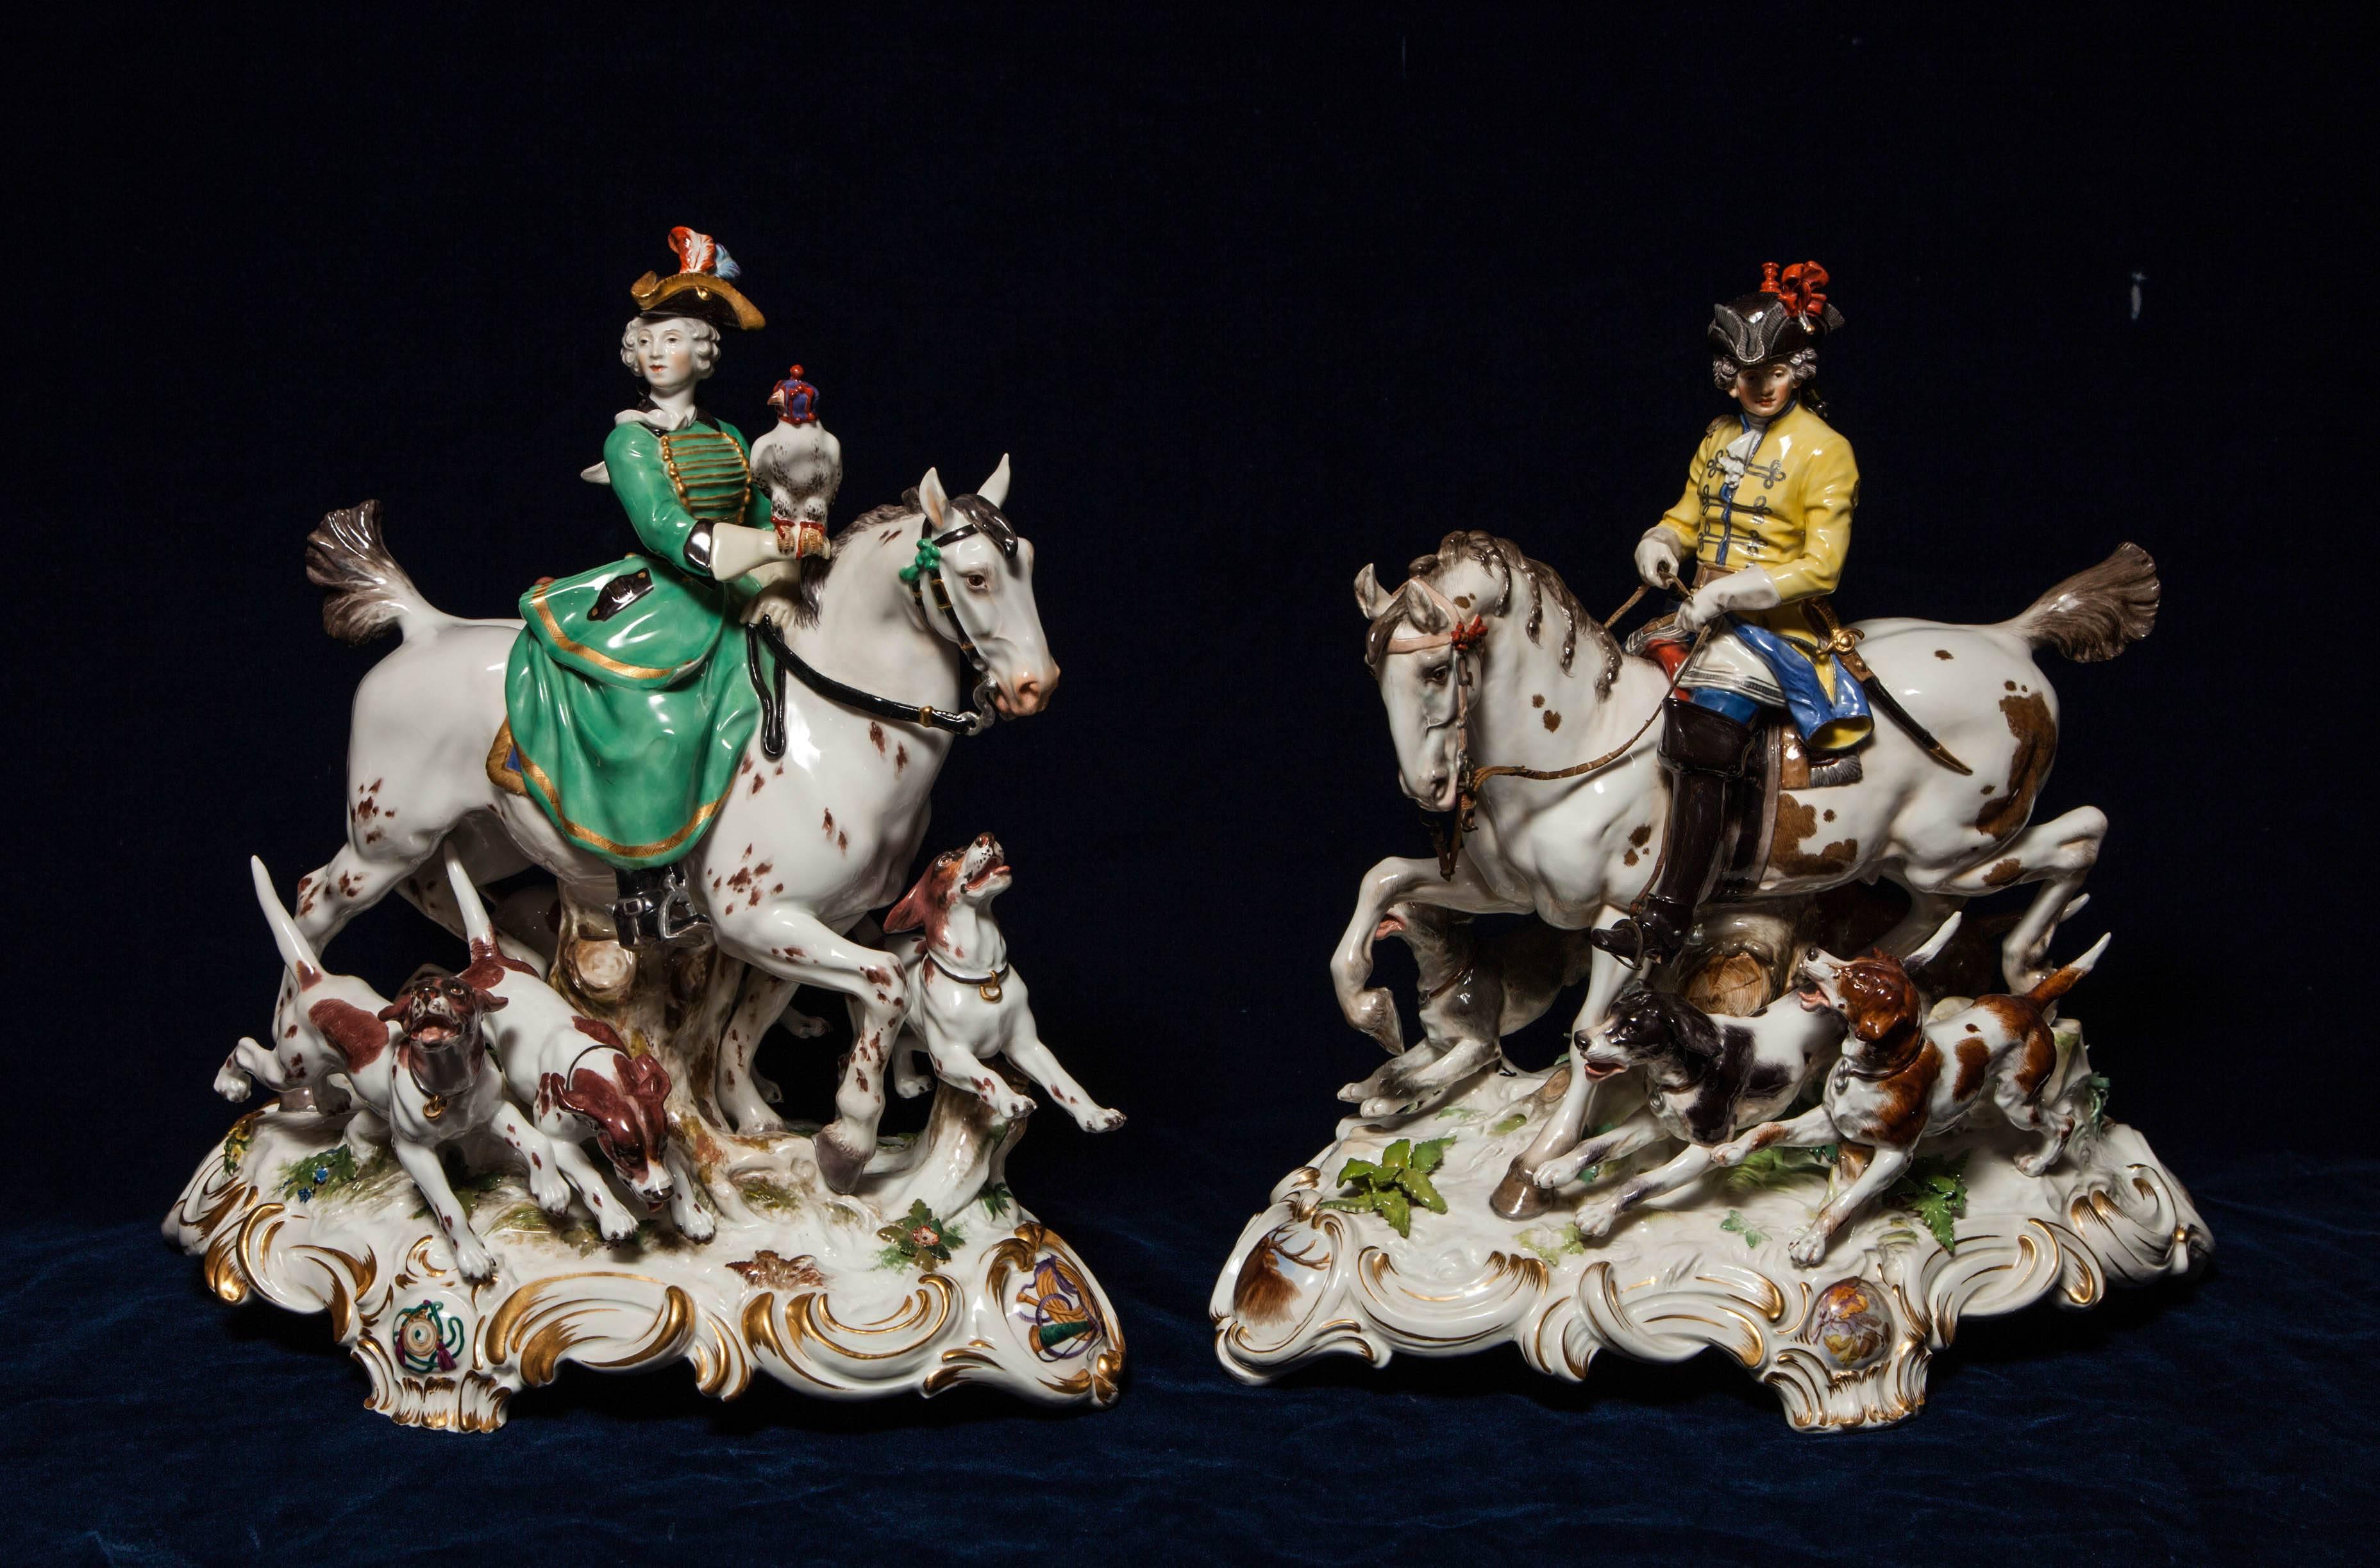 An exceptional and quite large pair of 19th century antique Meissen porcelain hunting groups with 